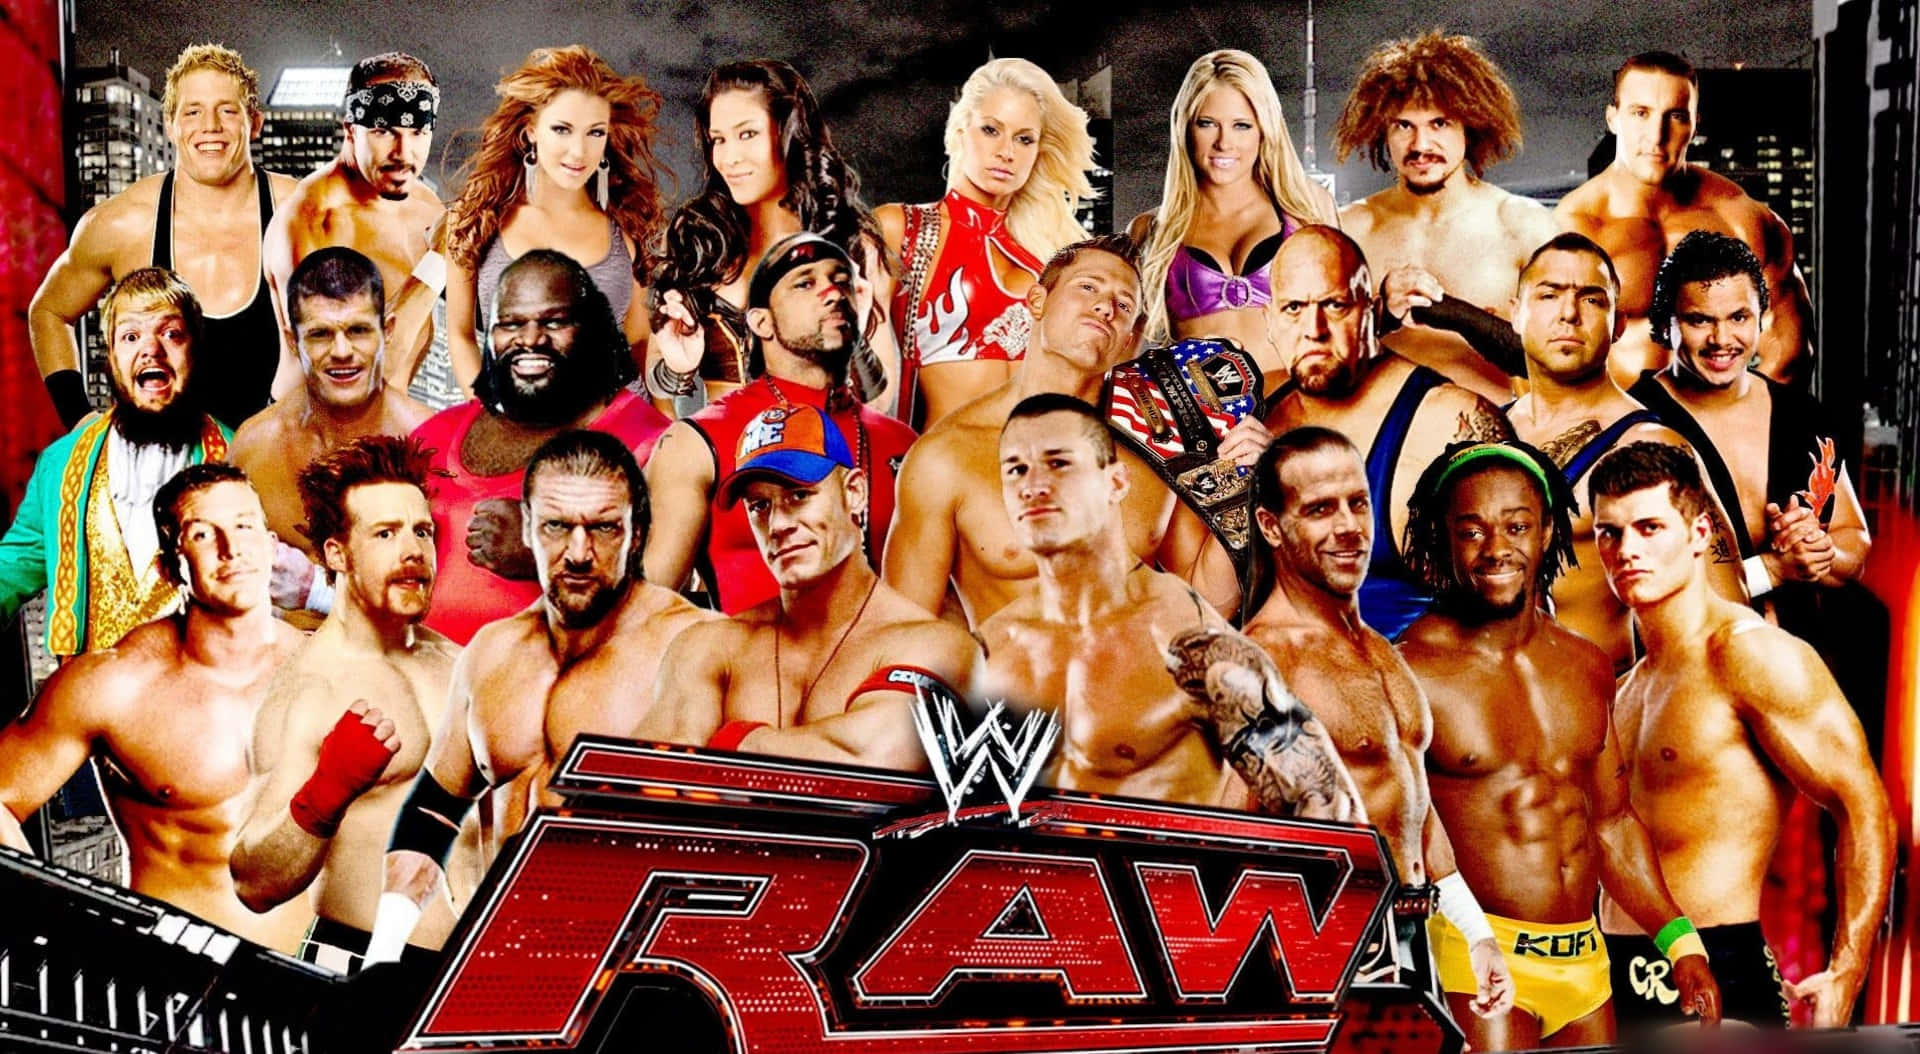 Get Ready for Intense Action at WWE